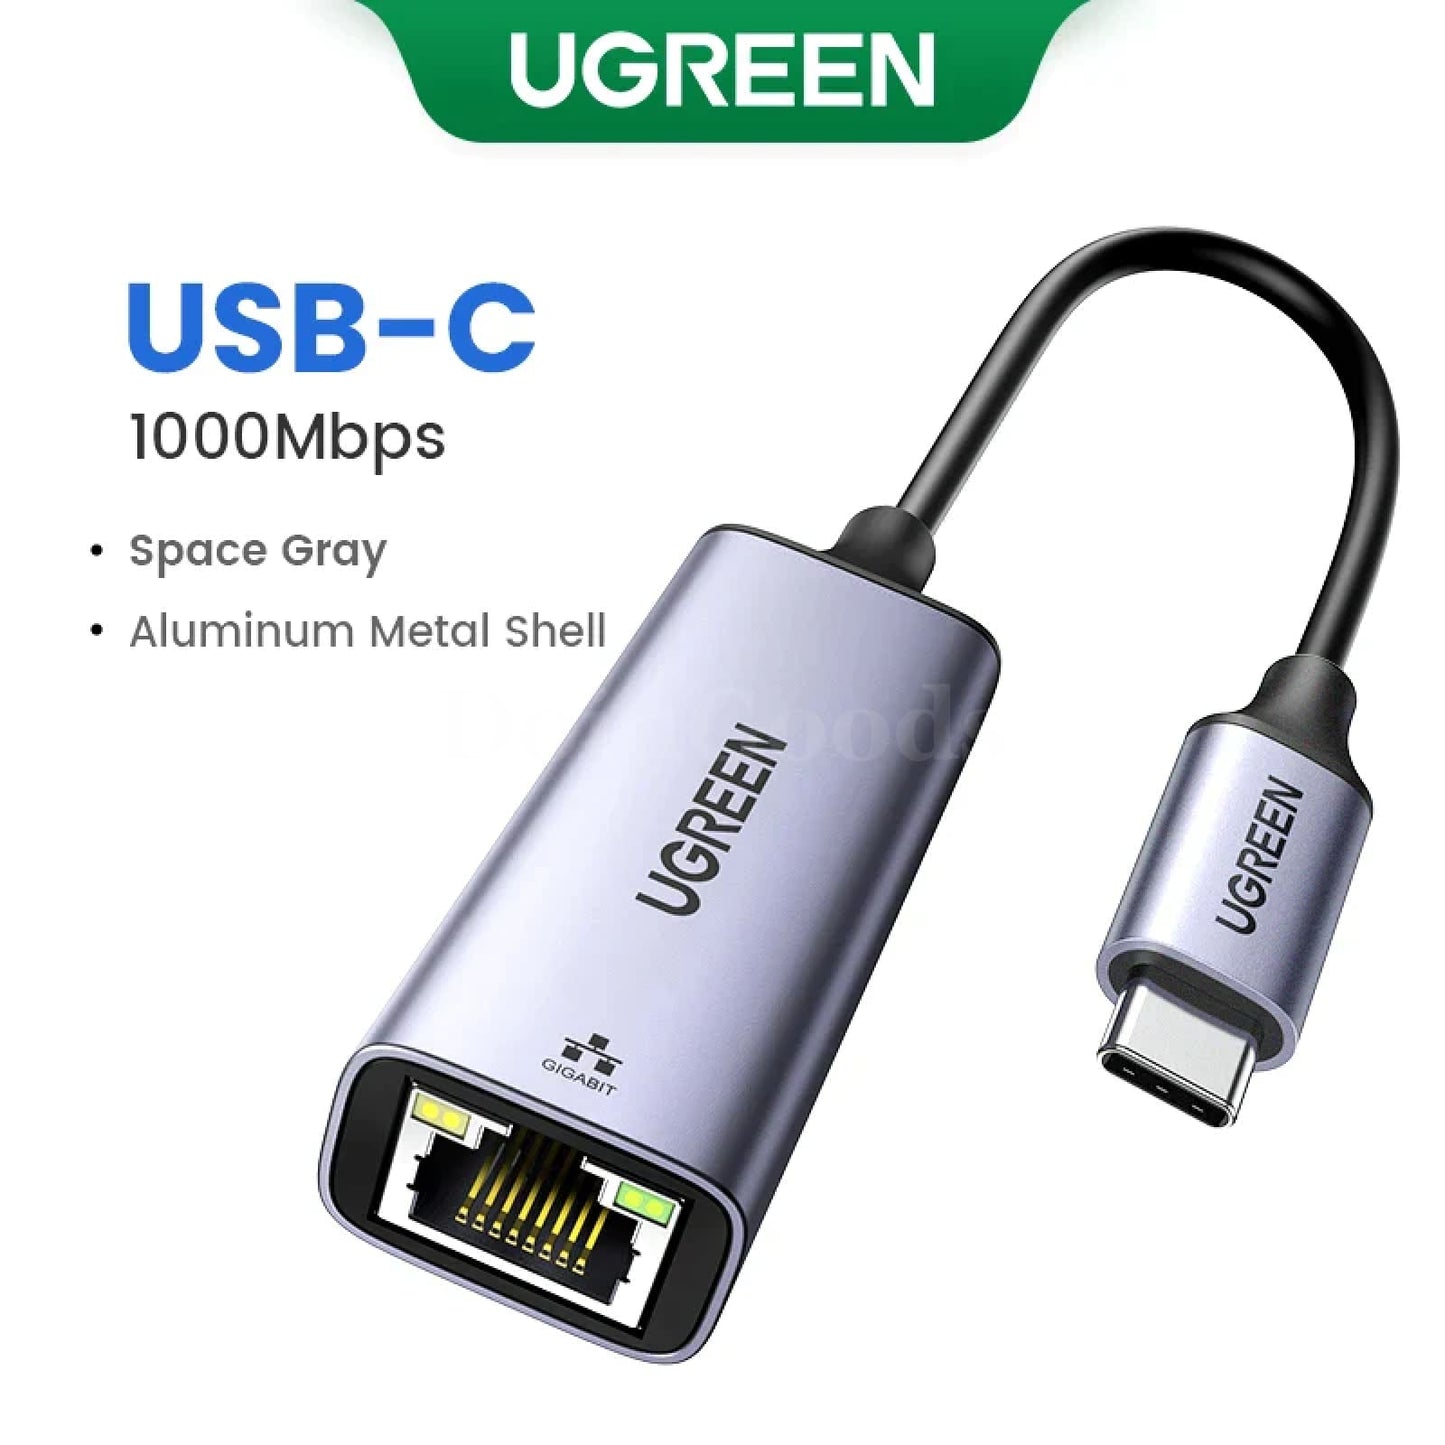 Ugreen Usb 3.0 Ethernet Adapter Network Card For Win 10 Pc Xiaomi Mi Box Usb-C Space Gray 301635